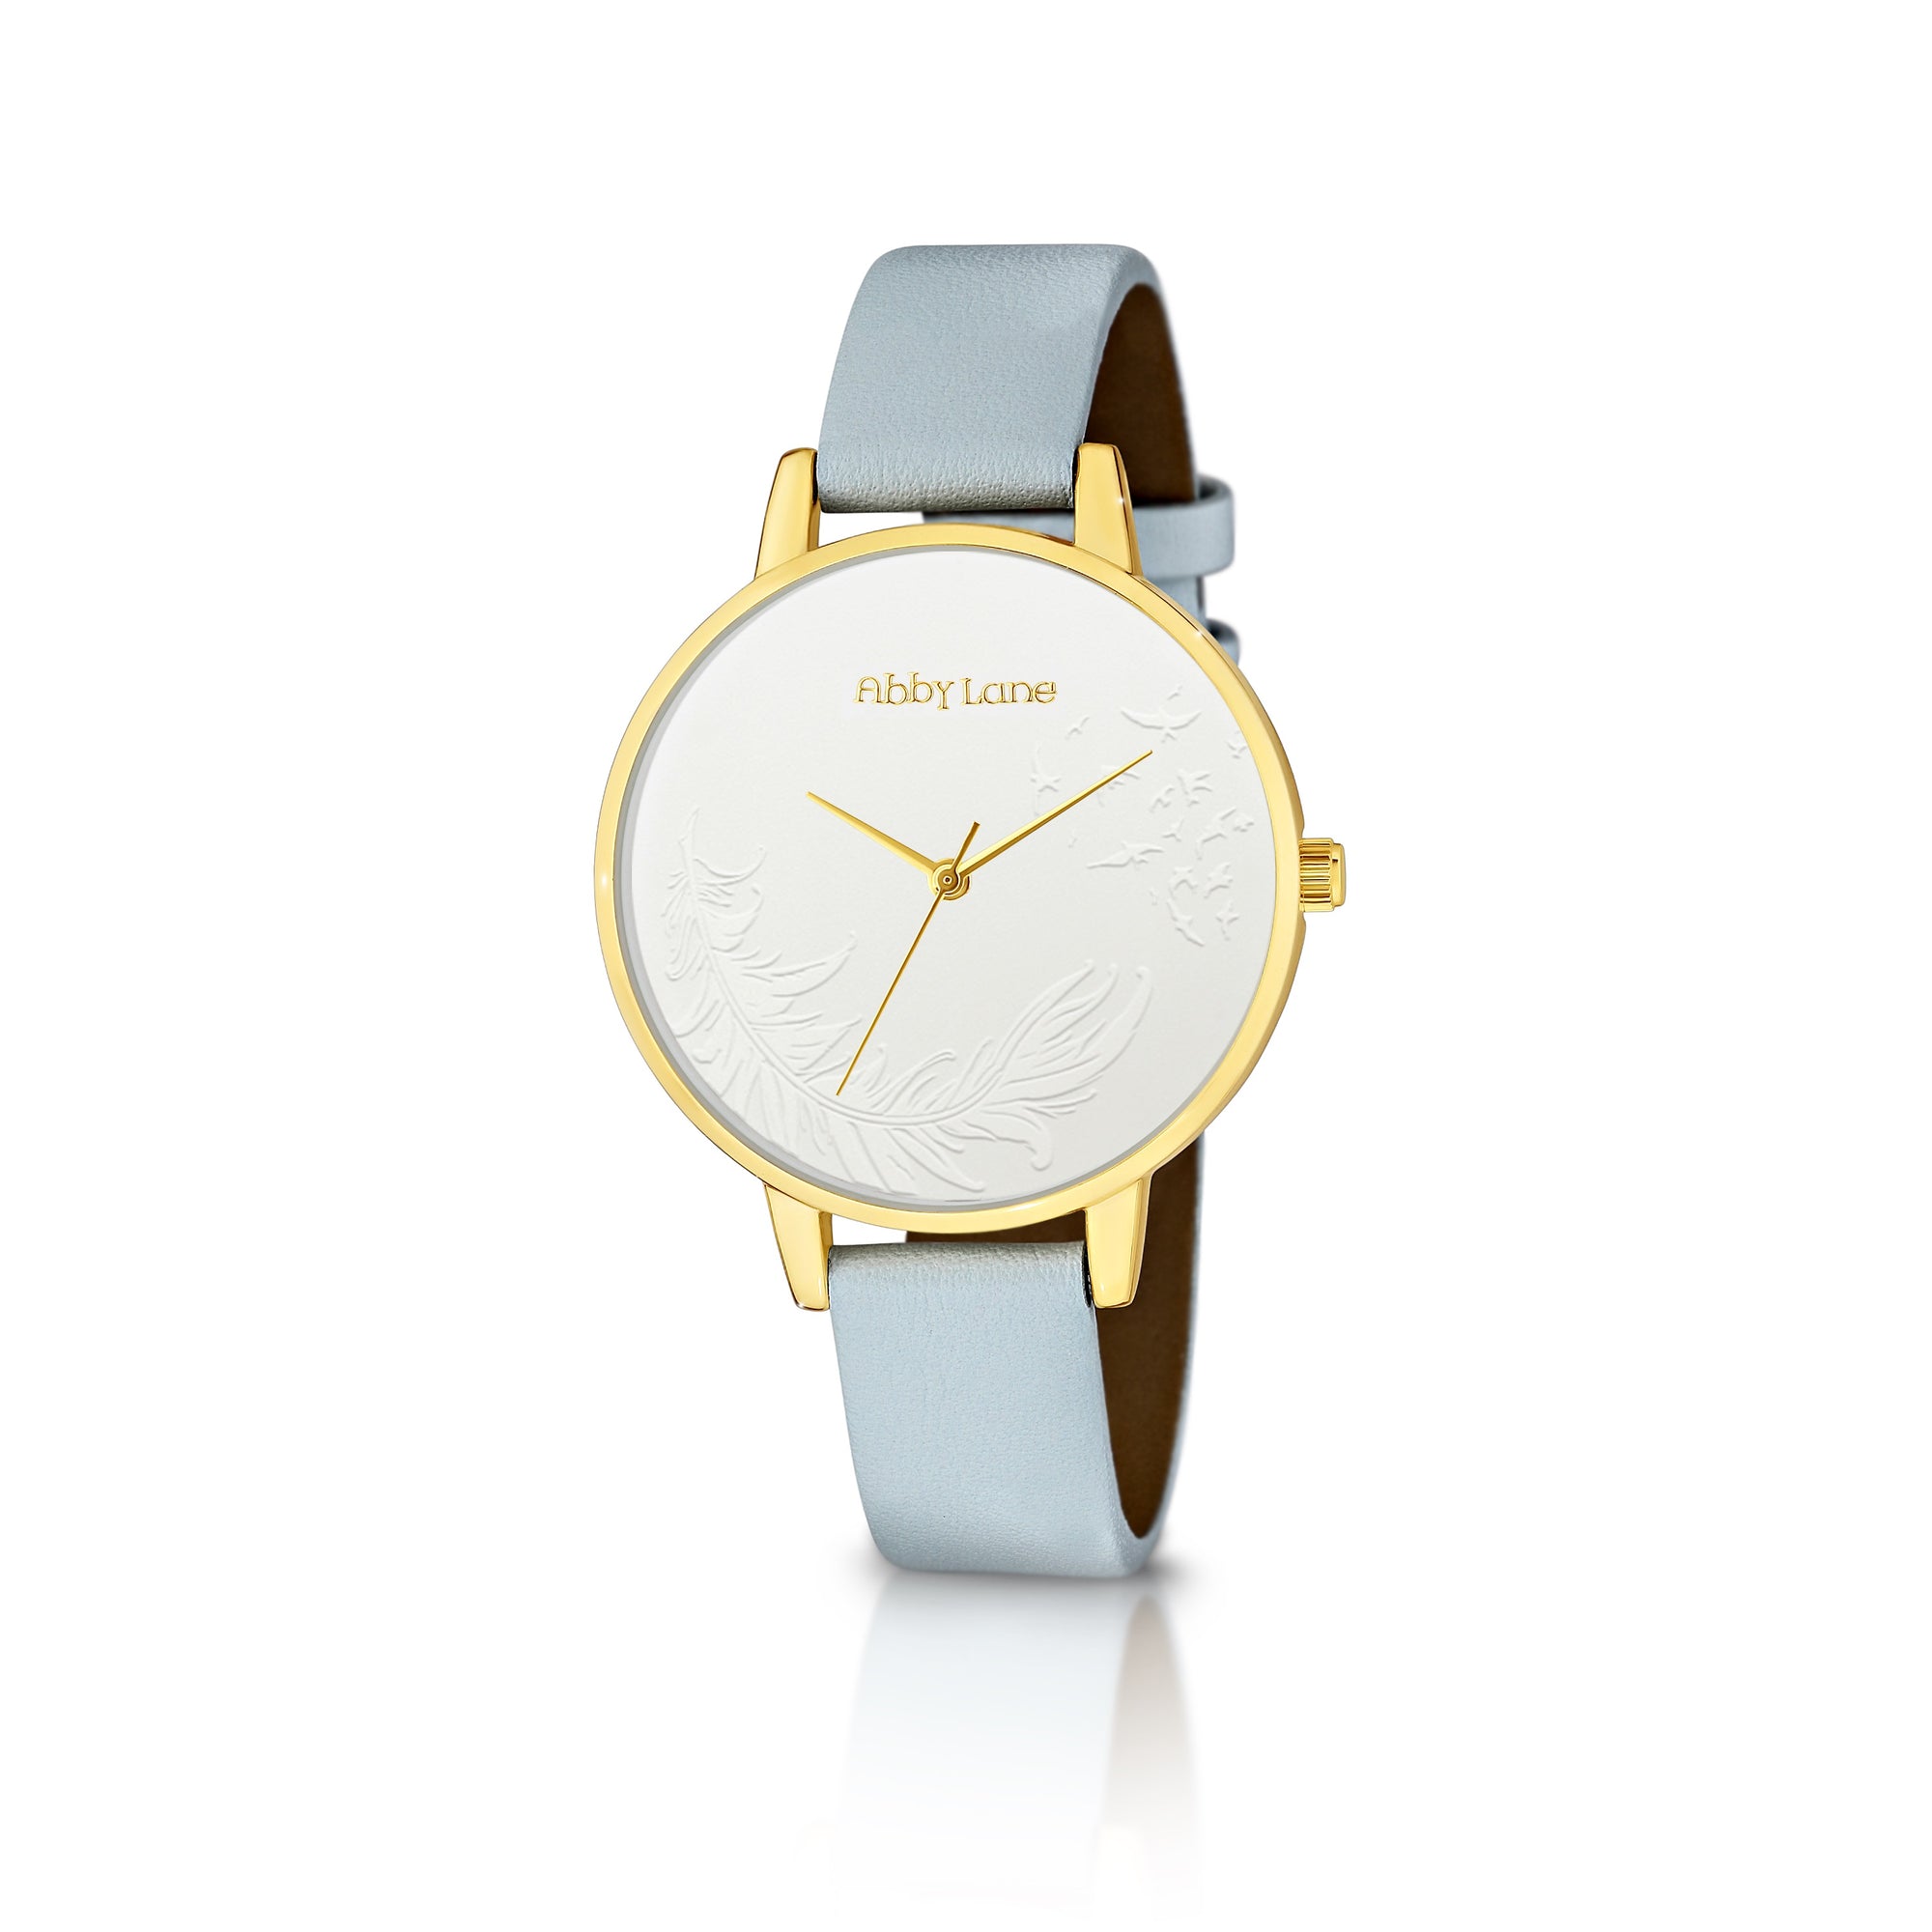 Abby Lane 'Emma' Collection Ladies Watch.